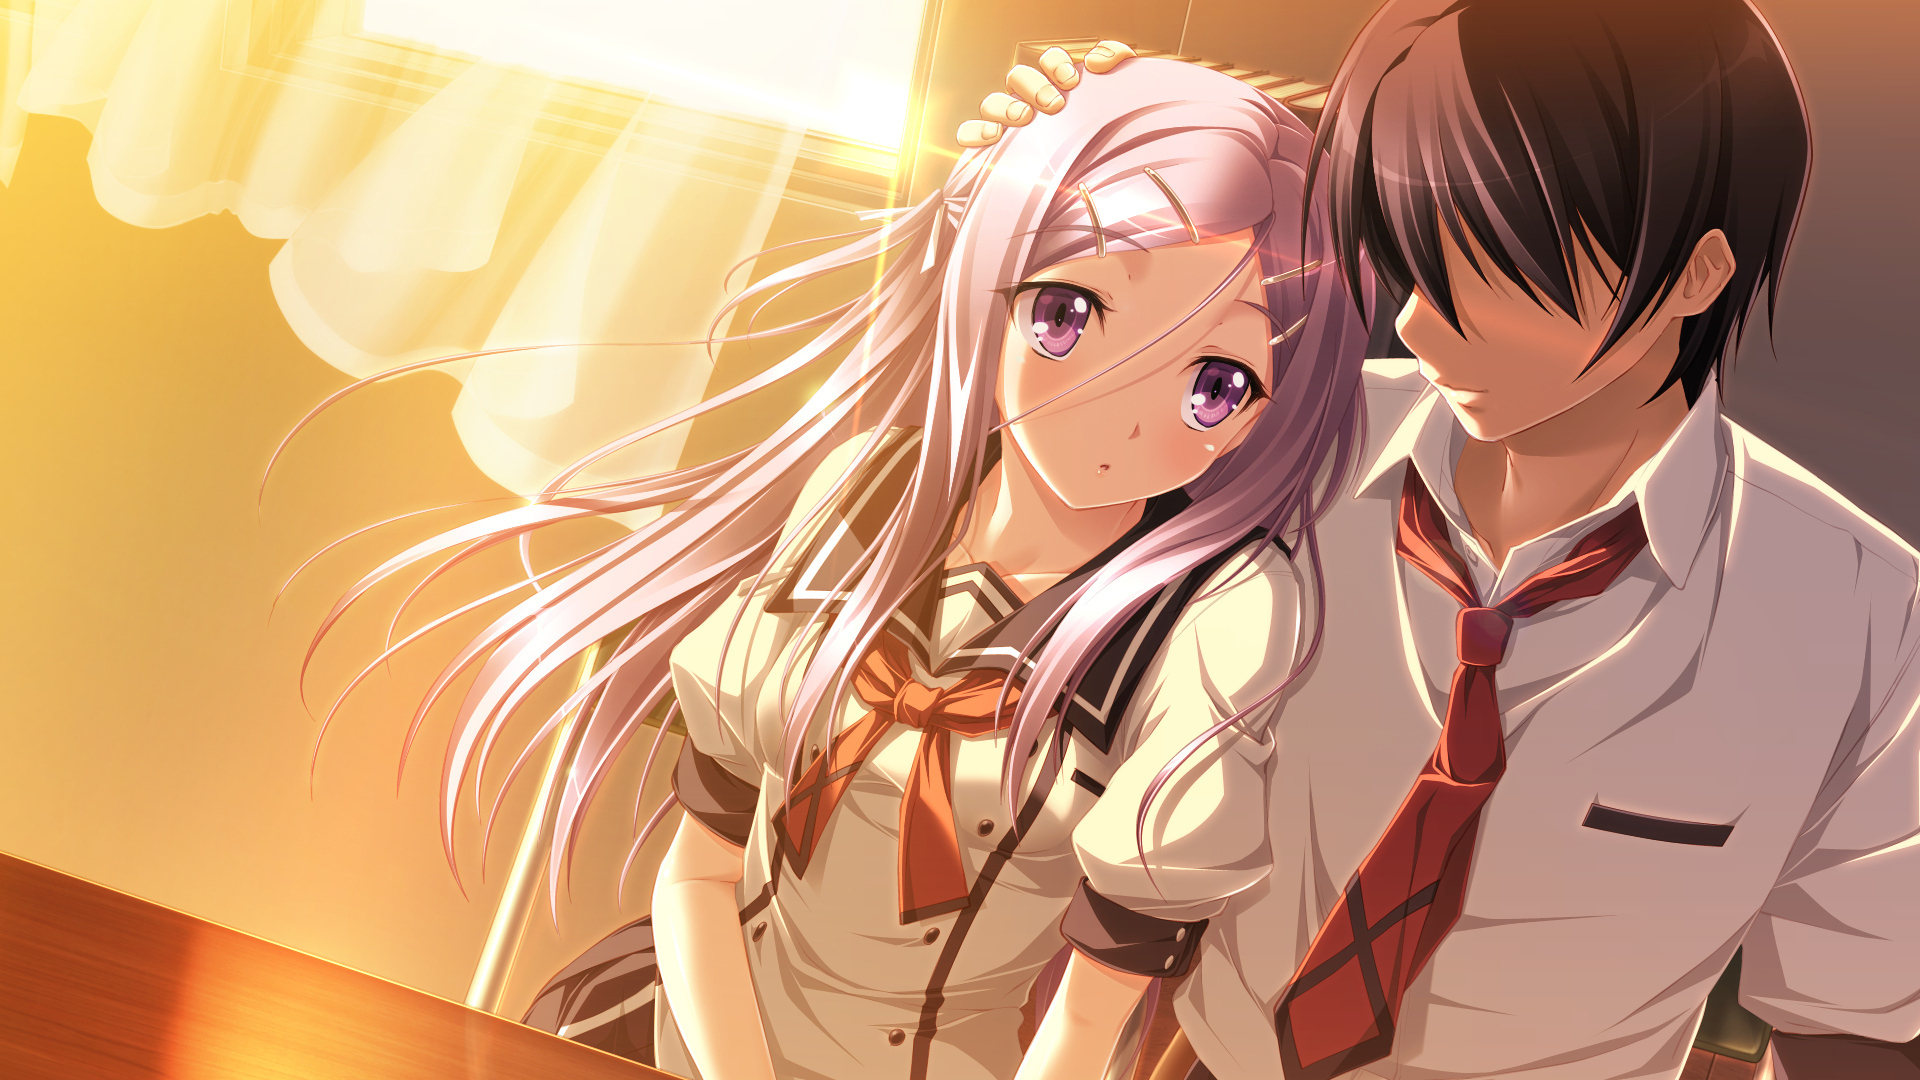 download anime couple wallpaper which is under the anime wallpapers